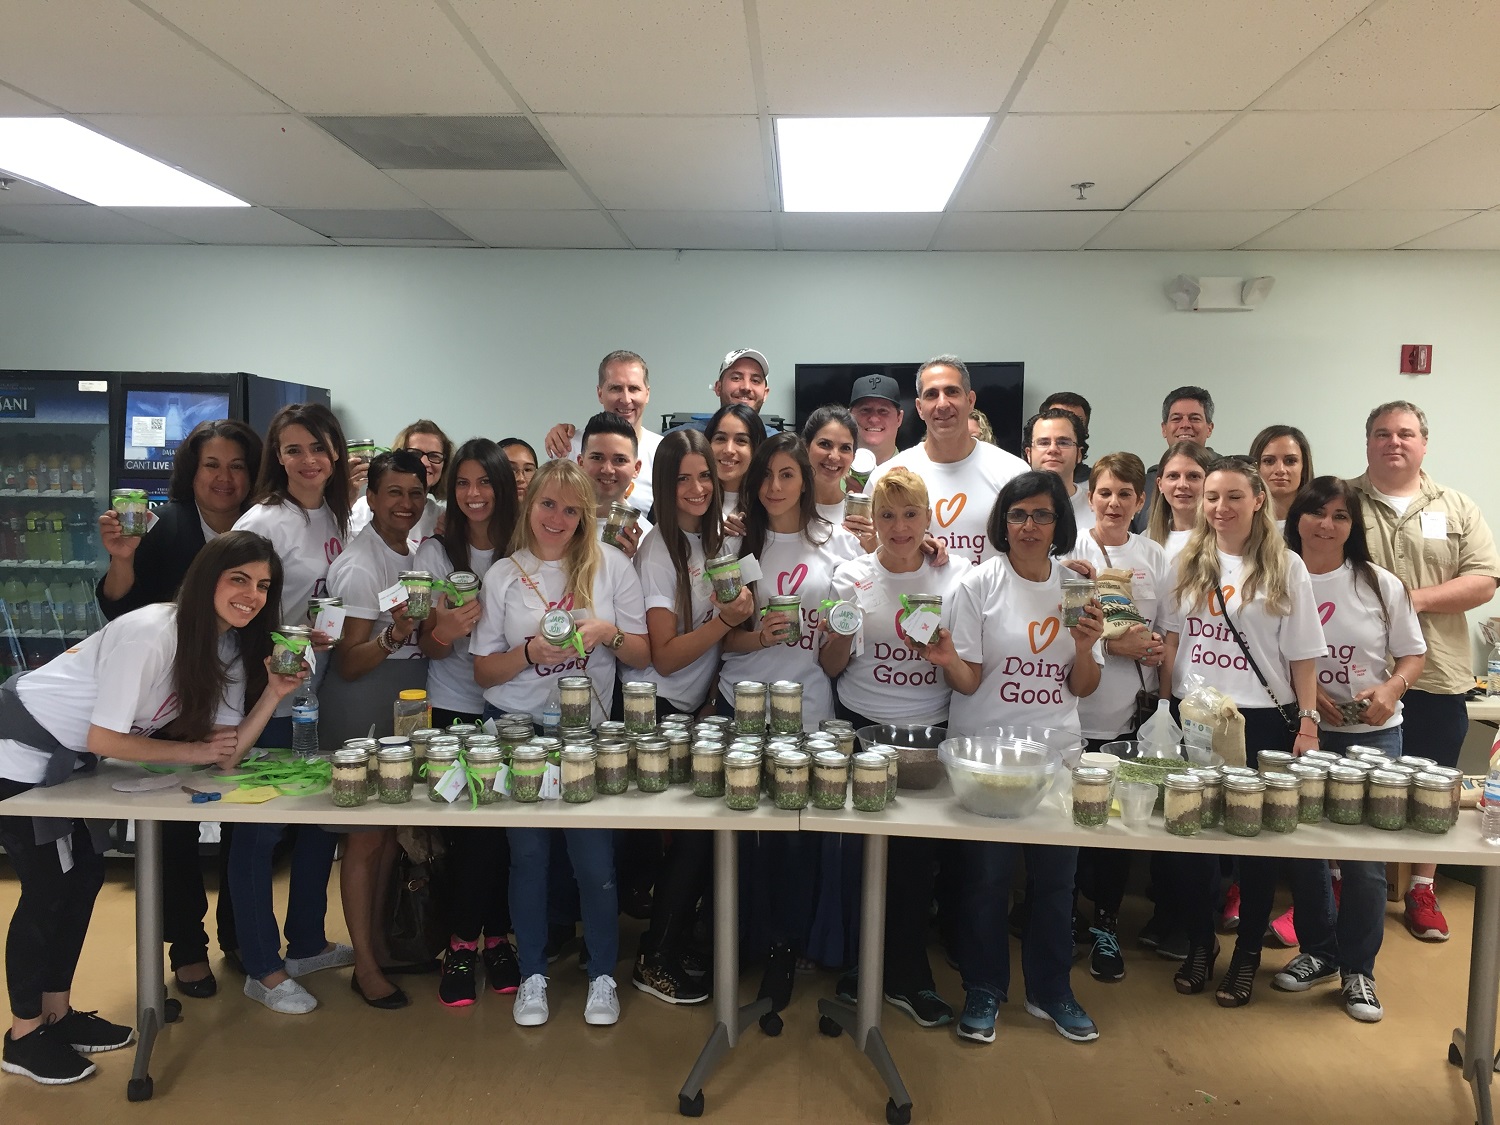 Northern Trust collects food and makes goodie jars for Good Deeds Day!